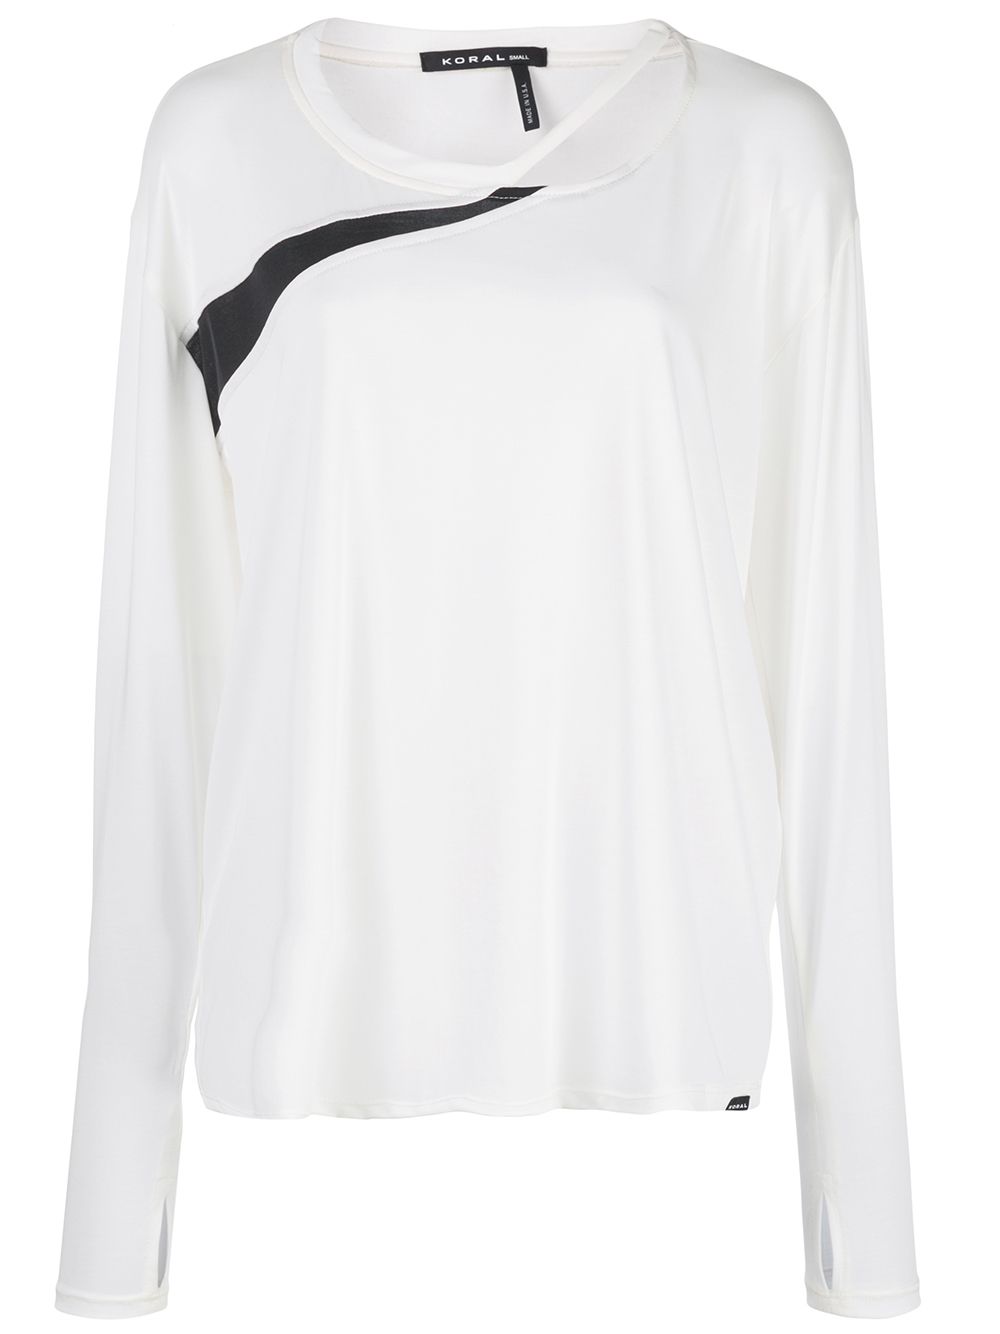 Koral Pace Cupro Longsleeve T-shirt In White